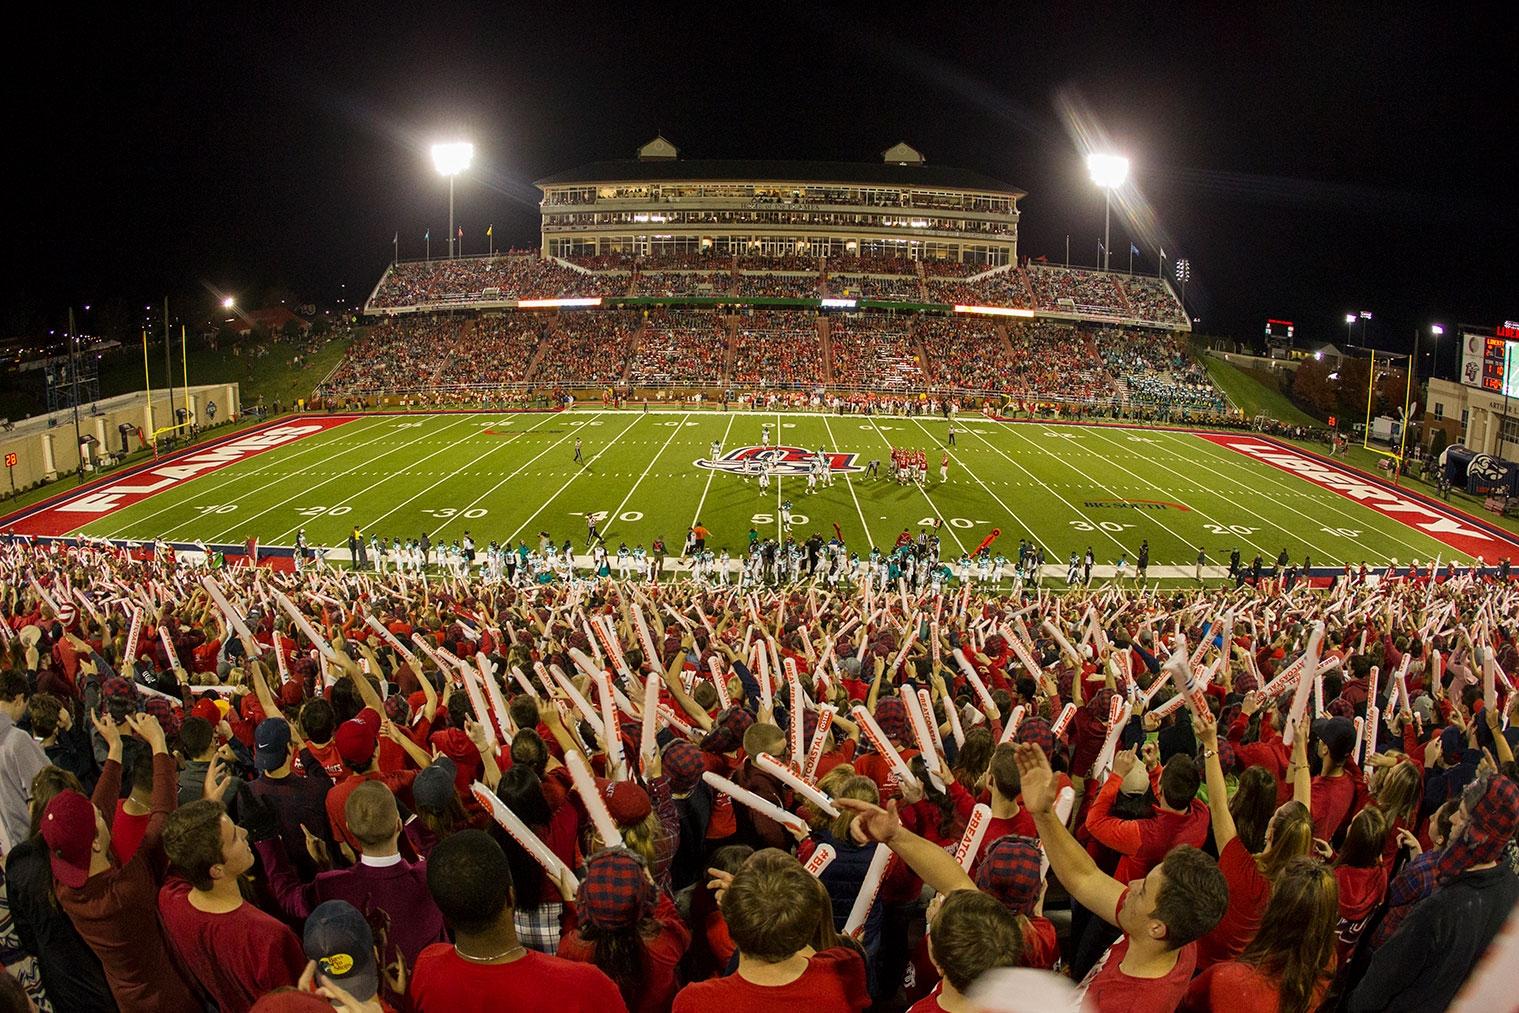 JSU enforces clear bag policy for home games